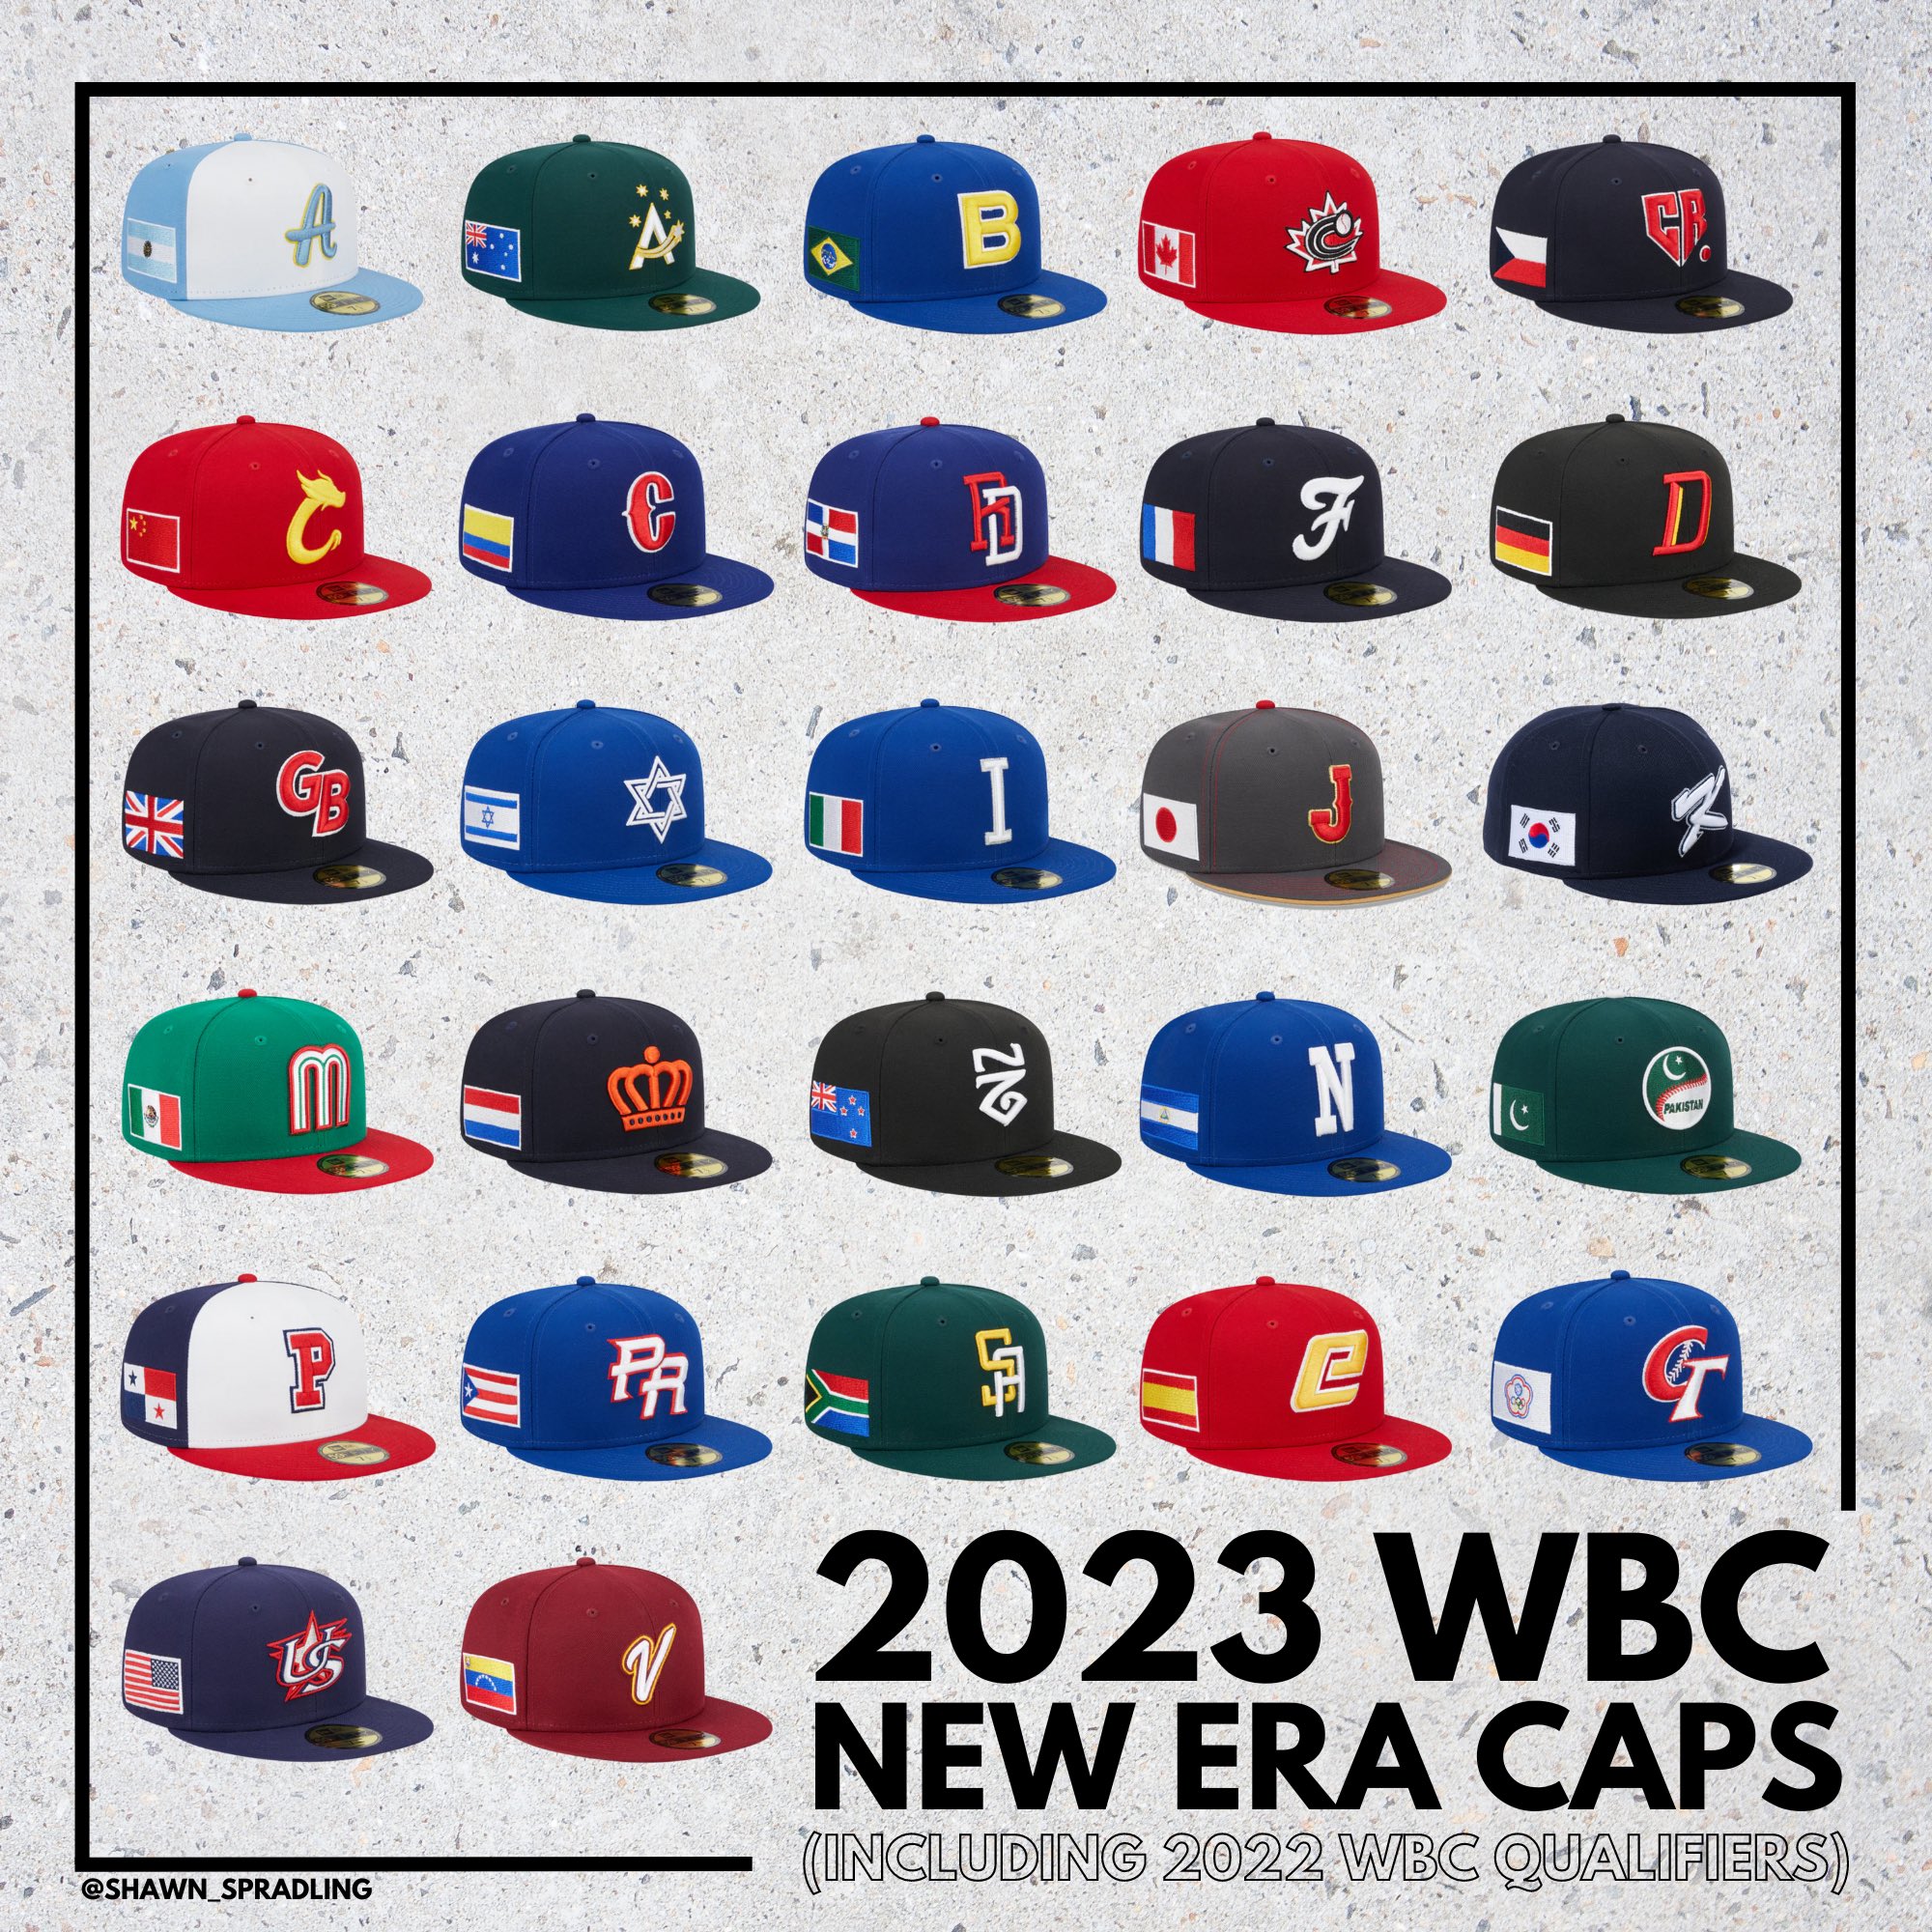 Shawn Spradling on X: All New Era caps for the 2023 WBC and